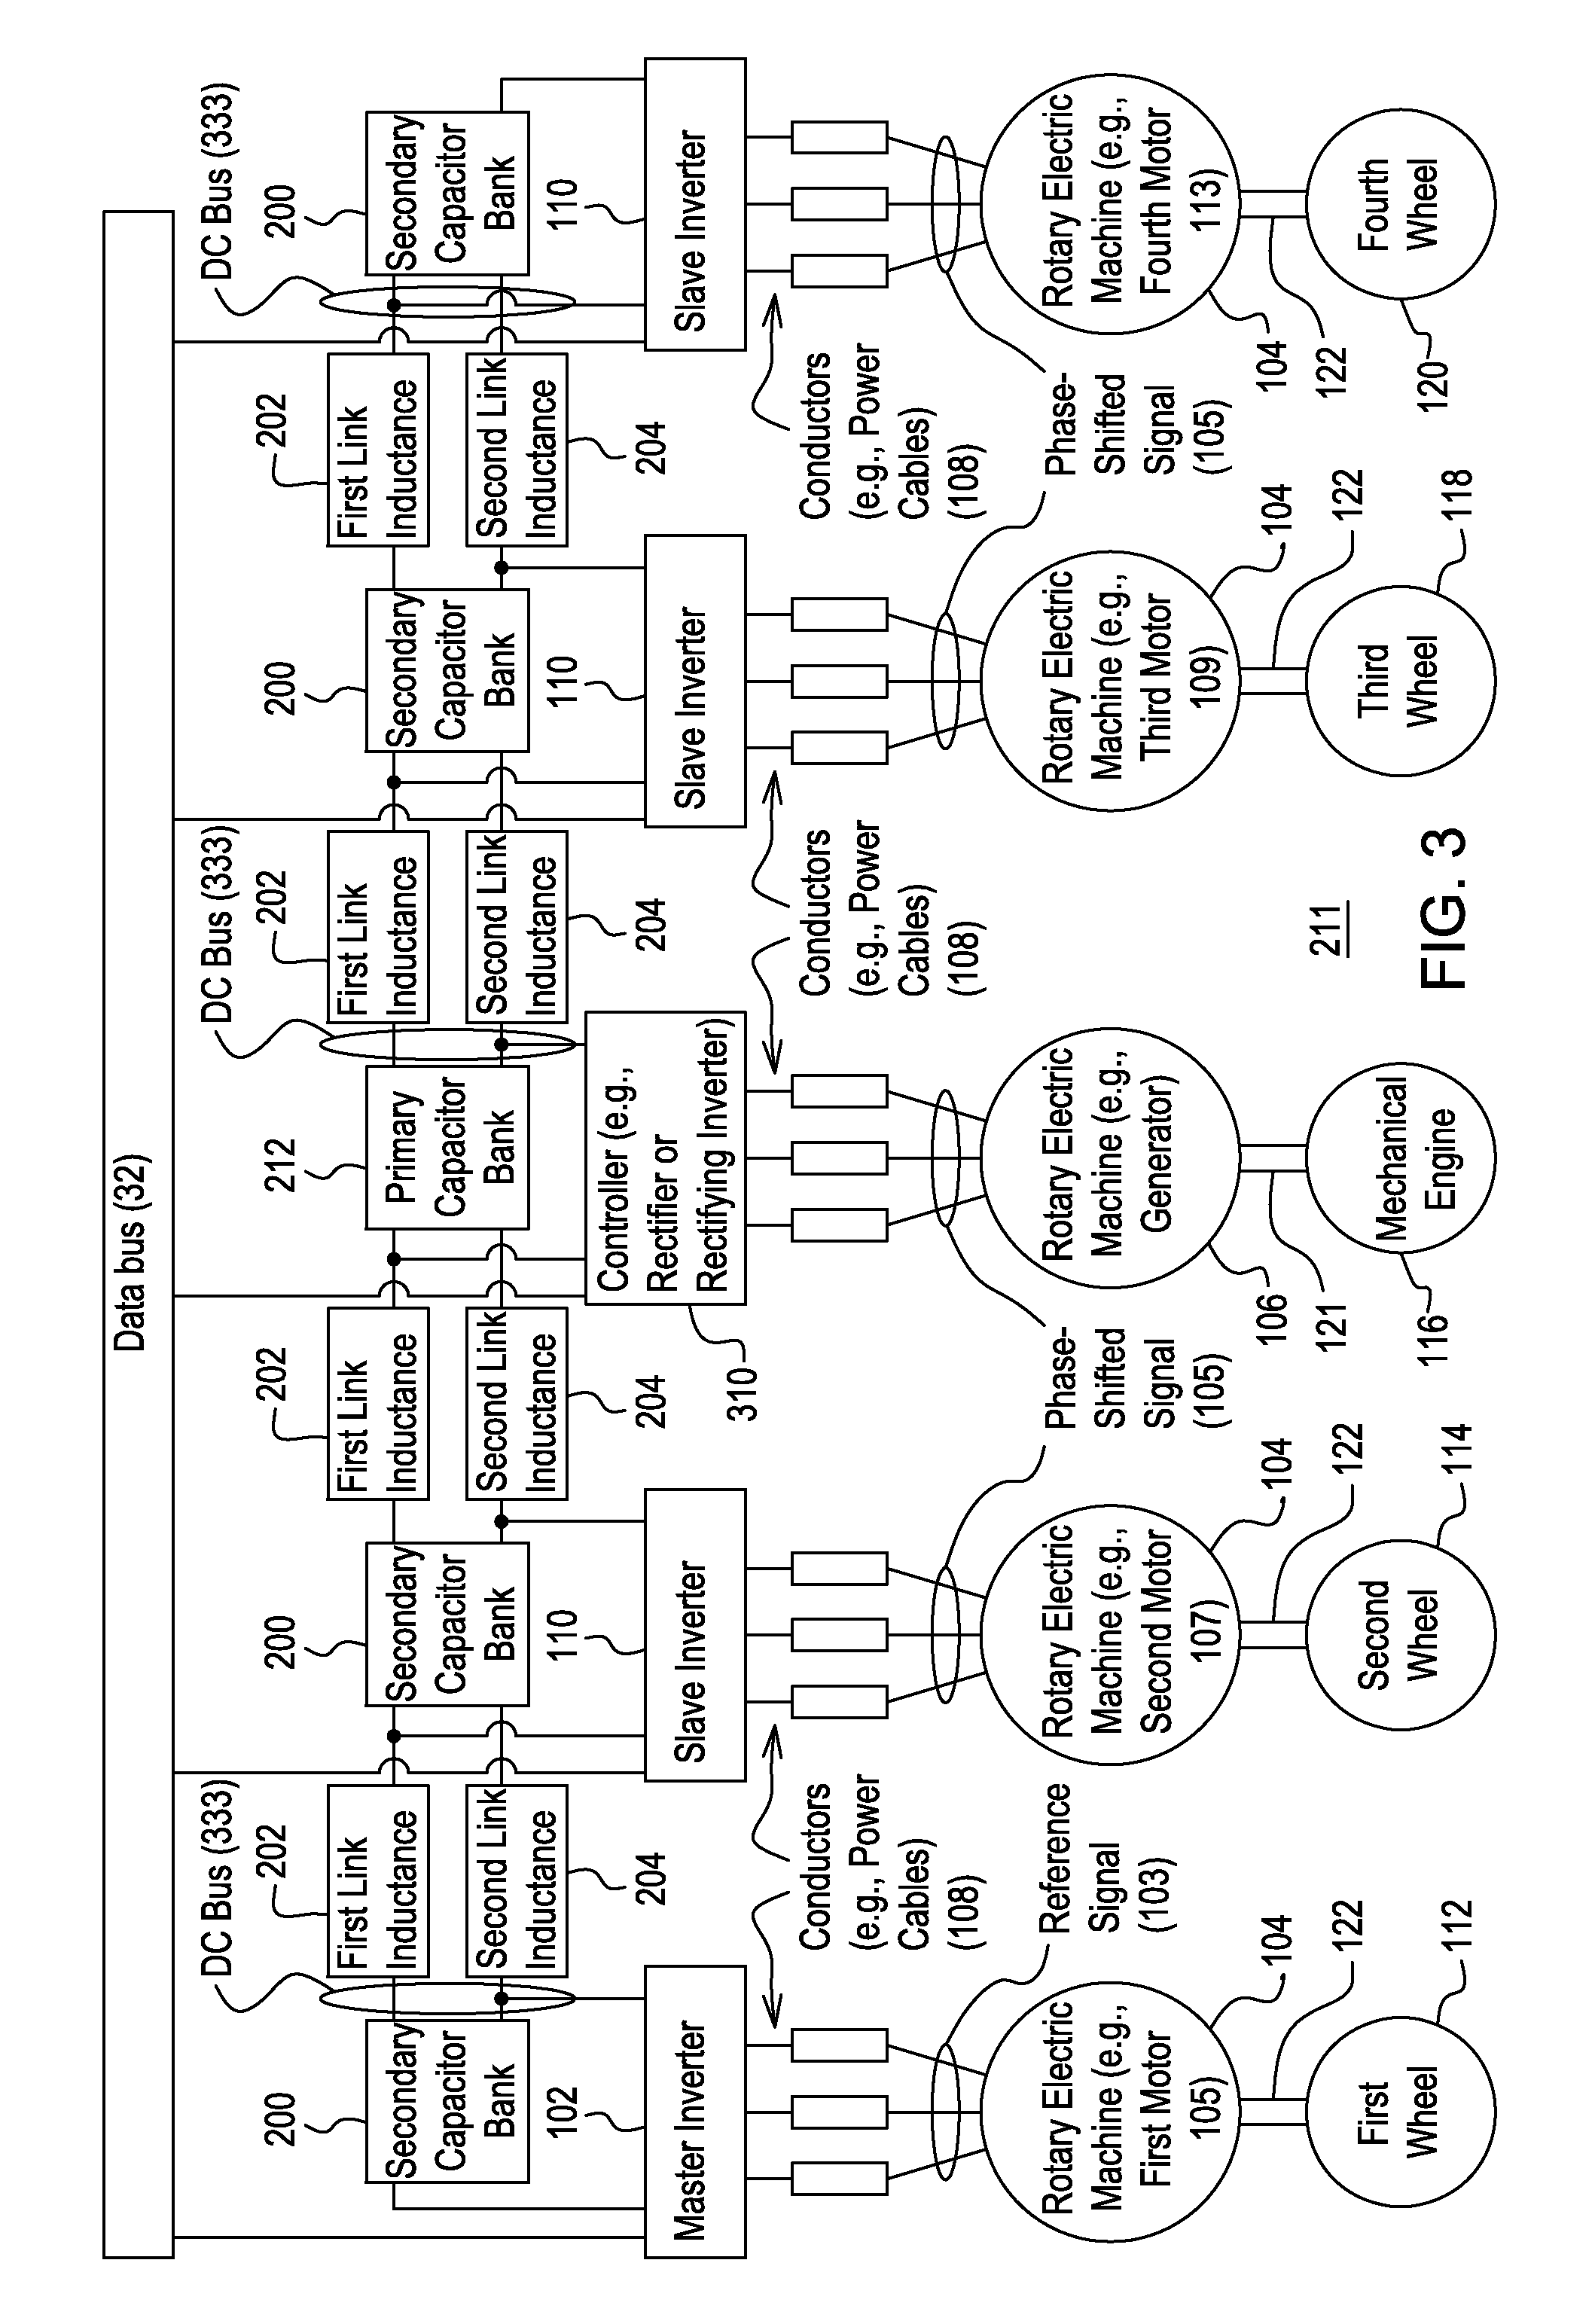 System for controlling rotary electric machines to reduce current ripple on a direct current bus